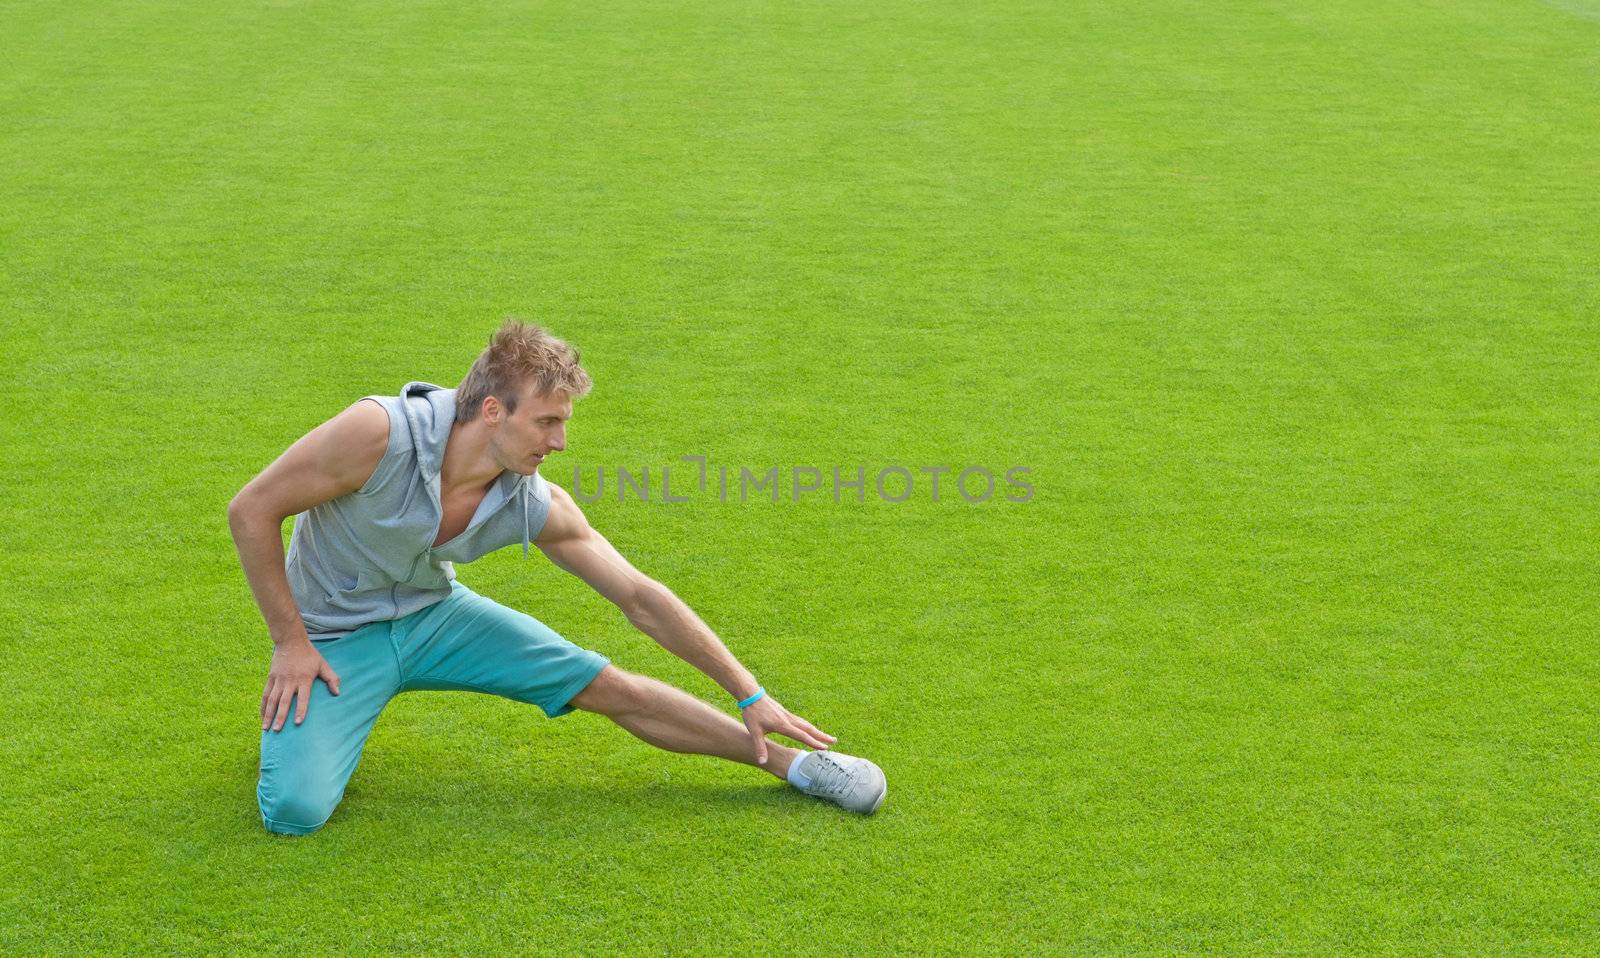 Fit young man exercising outdoors on green sports field.